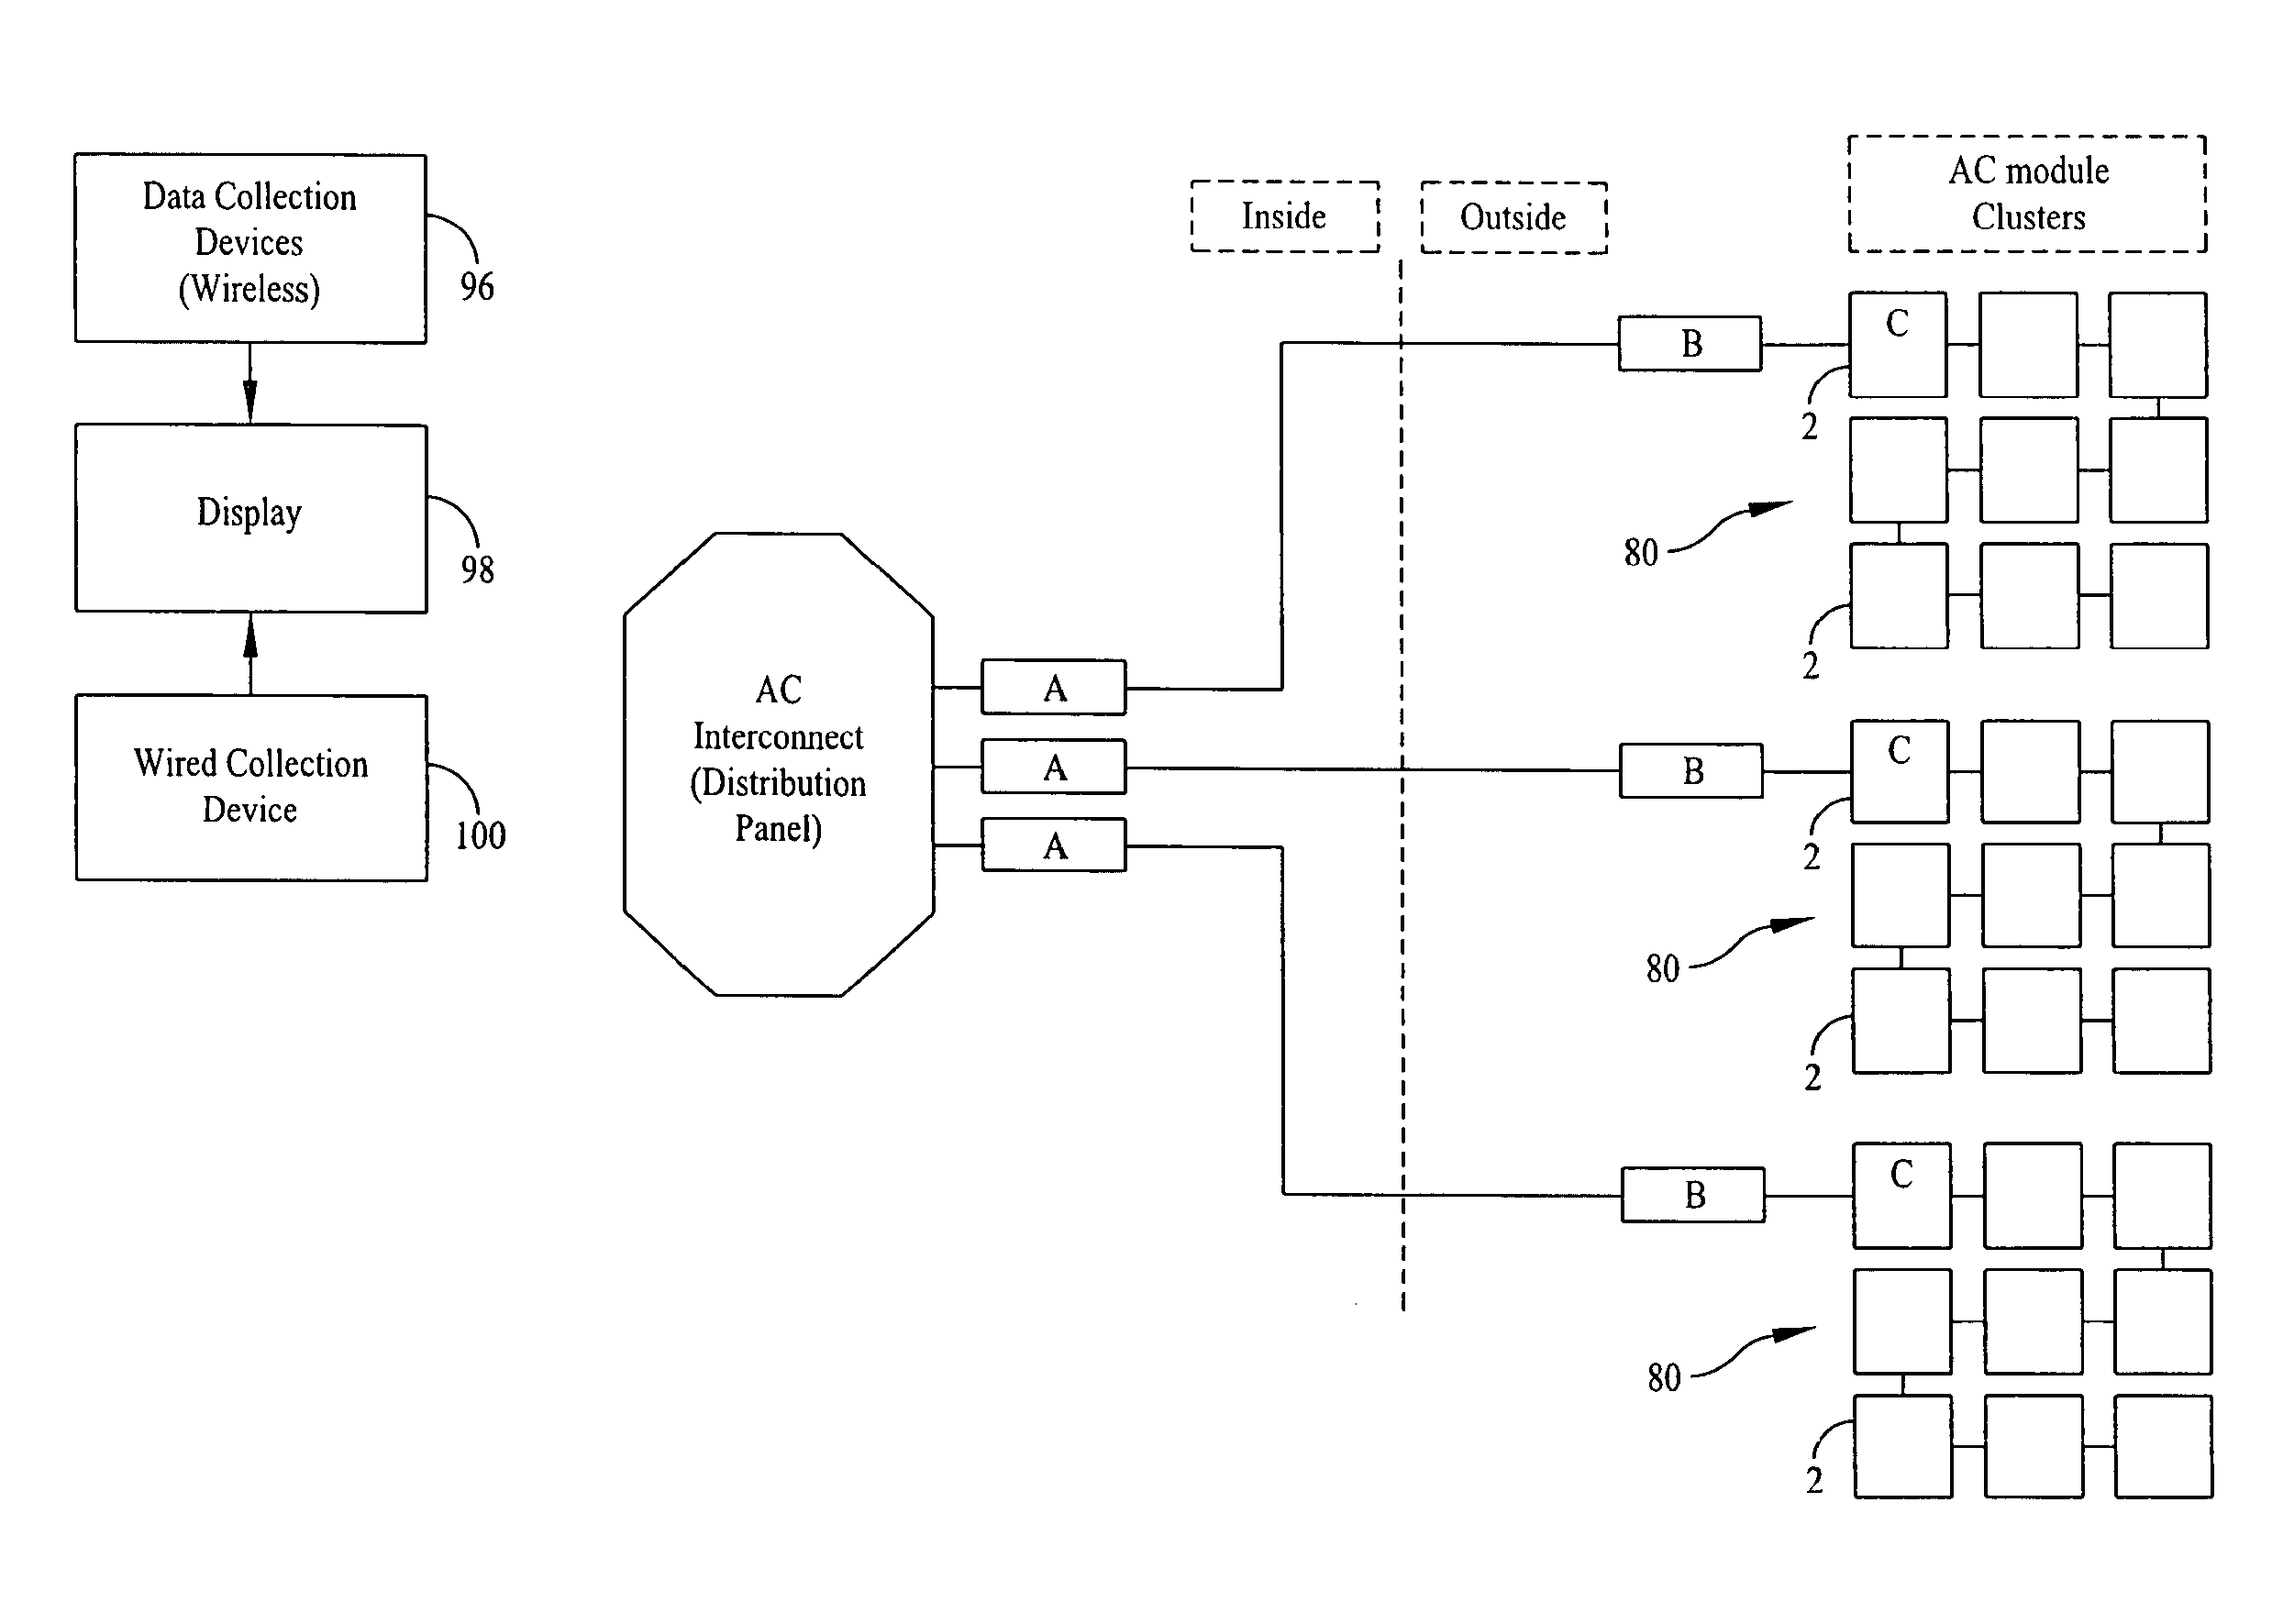 Data acquisition apparatus and methodology for self-diagnosing of ac modules